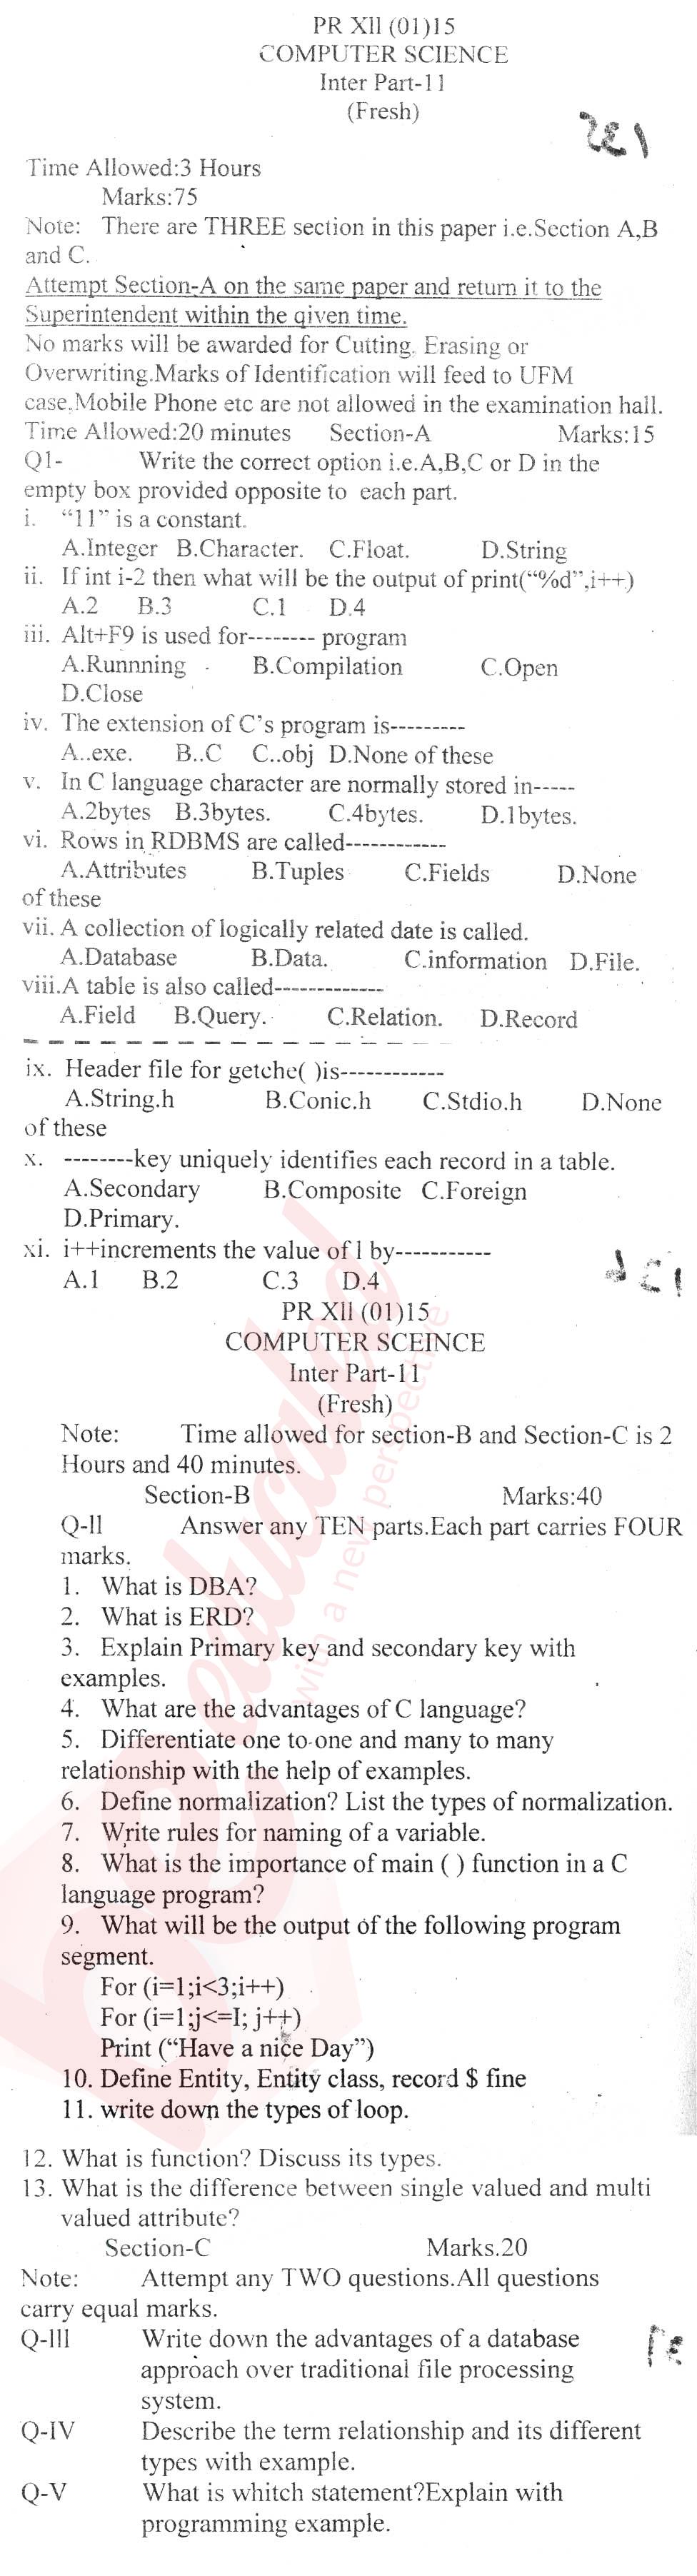 Computer Science FA Part 2 Past Paper Group 1 BISE Swat 2015